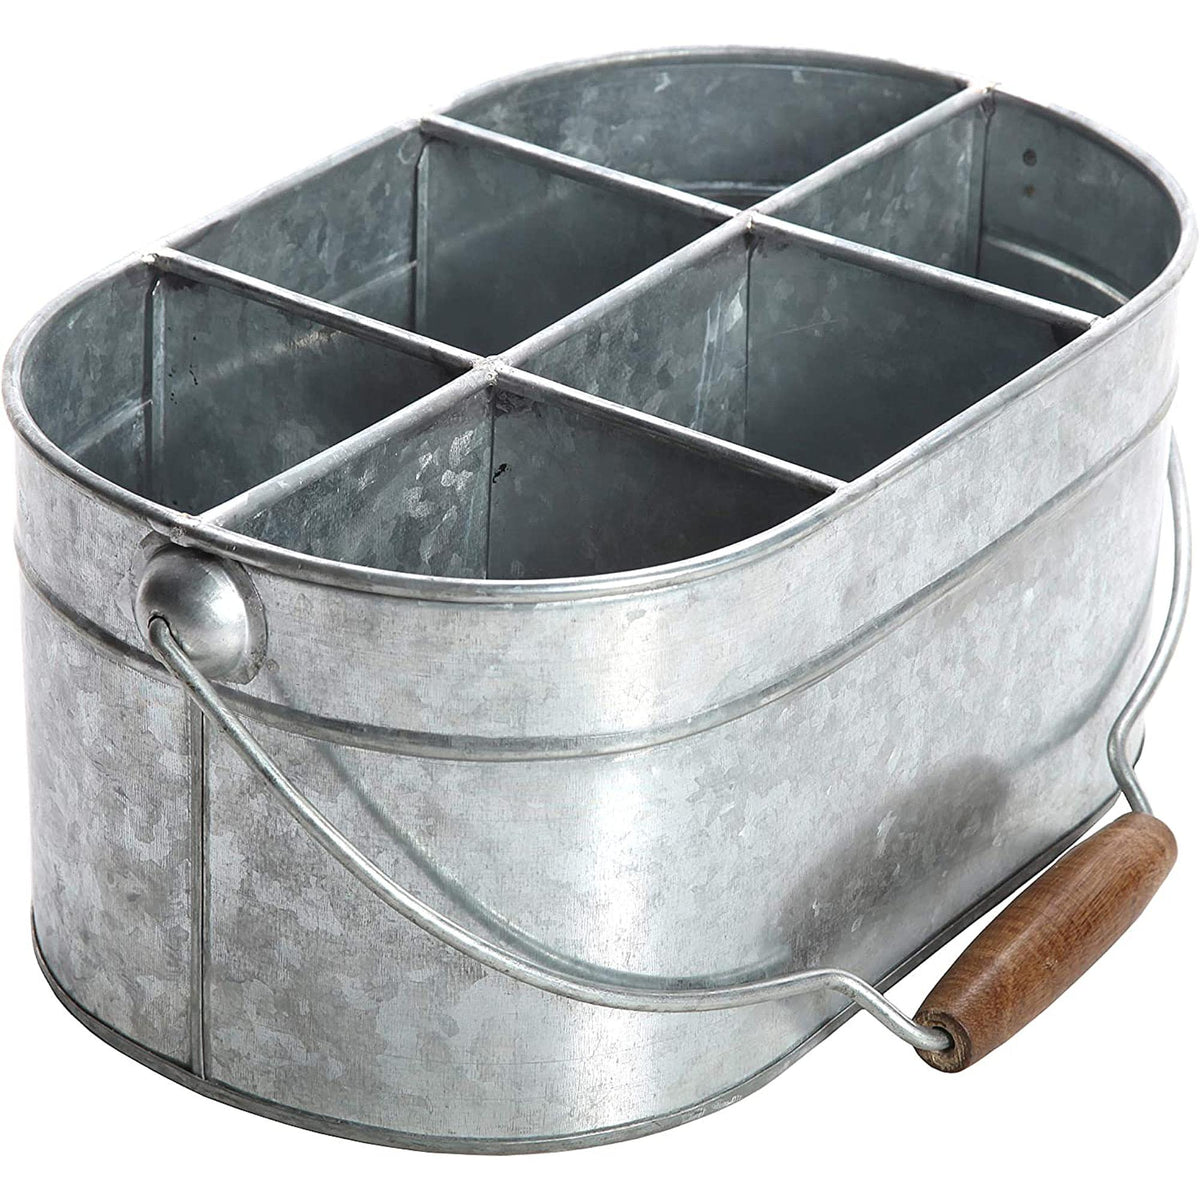 HOSLEY® Iron Galvanized Carry All Kitchen Utensil Caddy Serve Ware, 13 inches Long